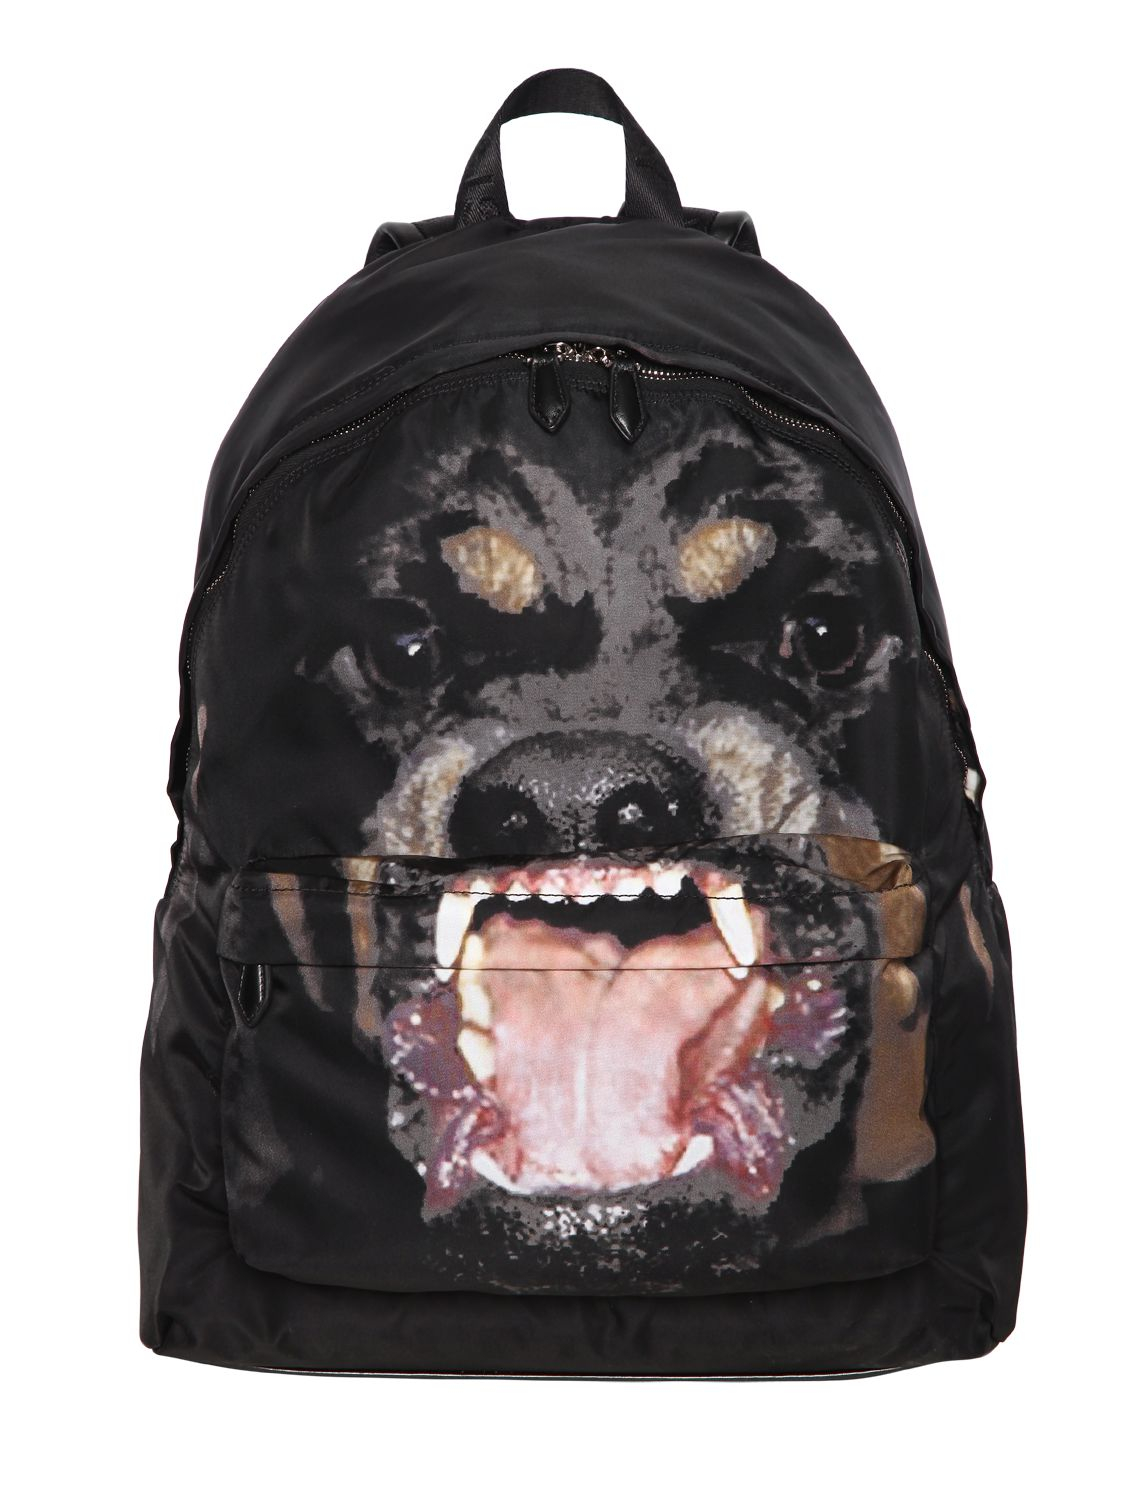 Givenchy Rottweiler Printed Nylon Backpack in Black | Lyst